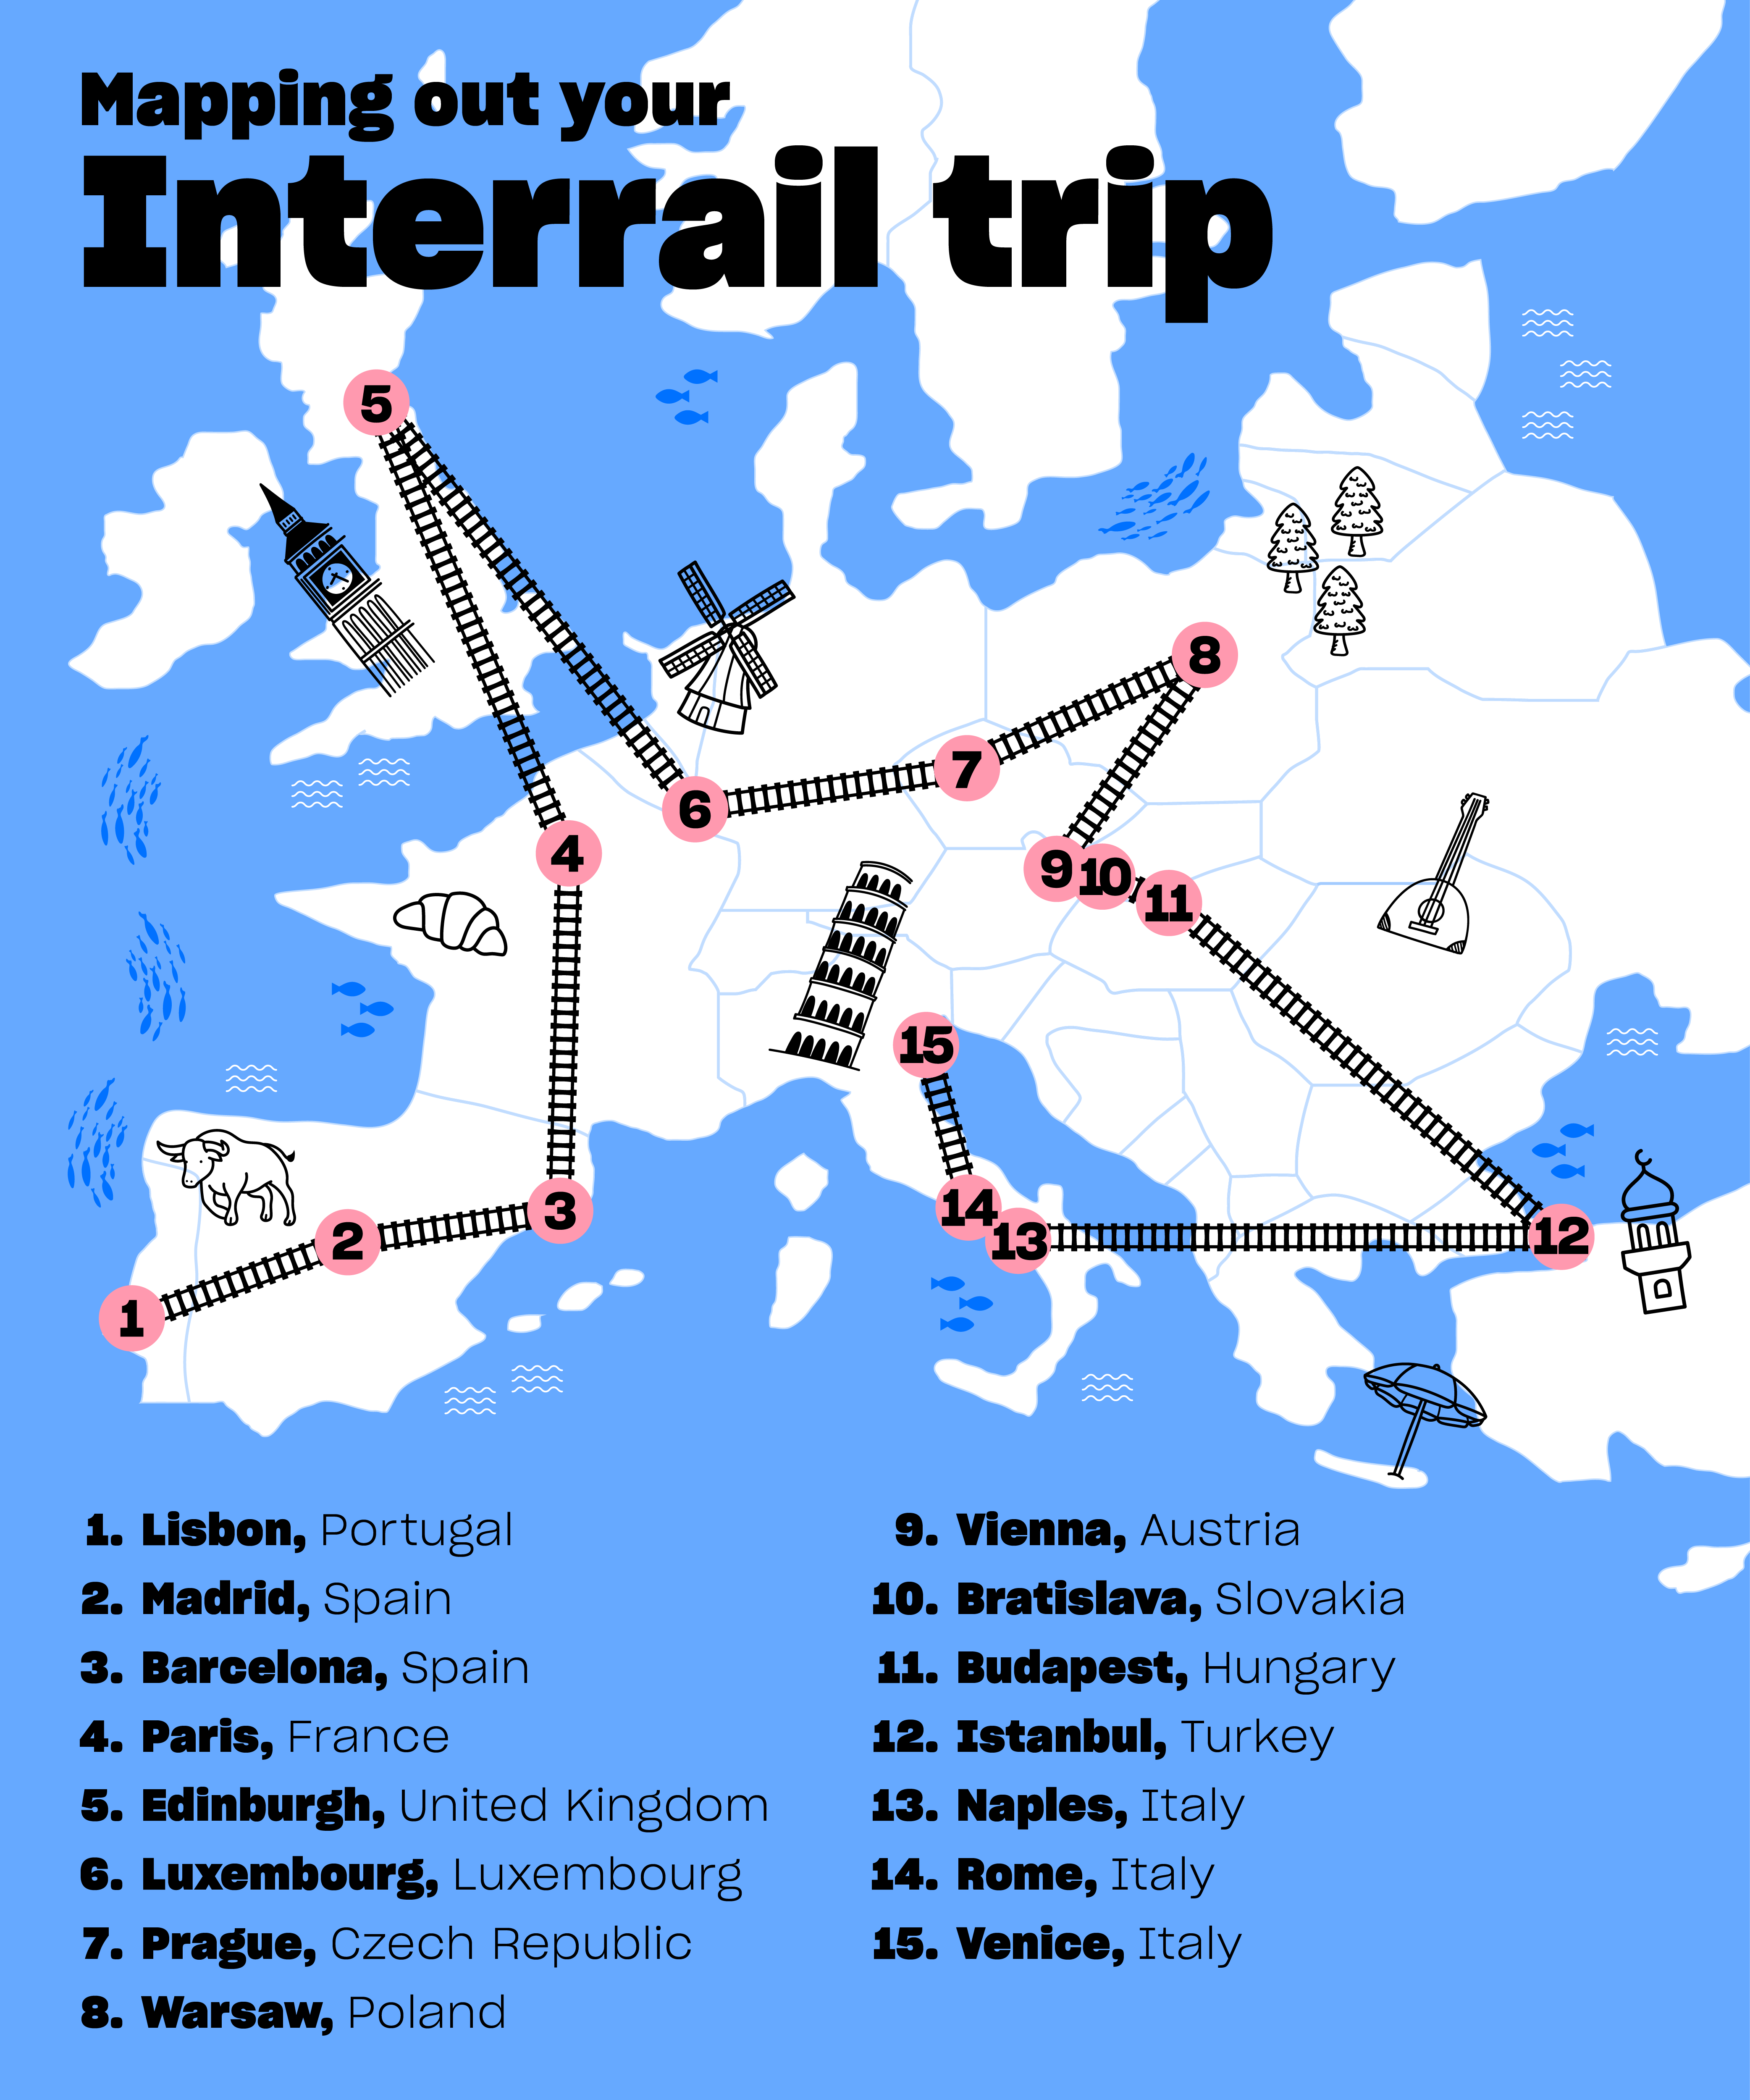 Map with train route suggestion based on the top 15 interrailing hotspots